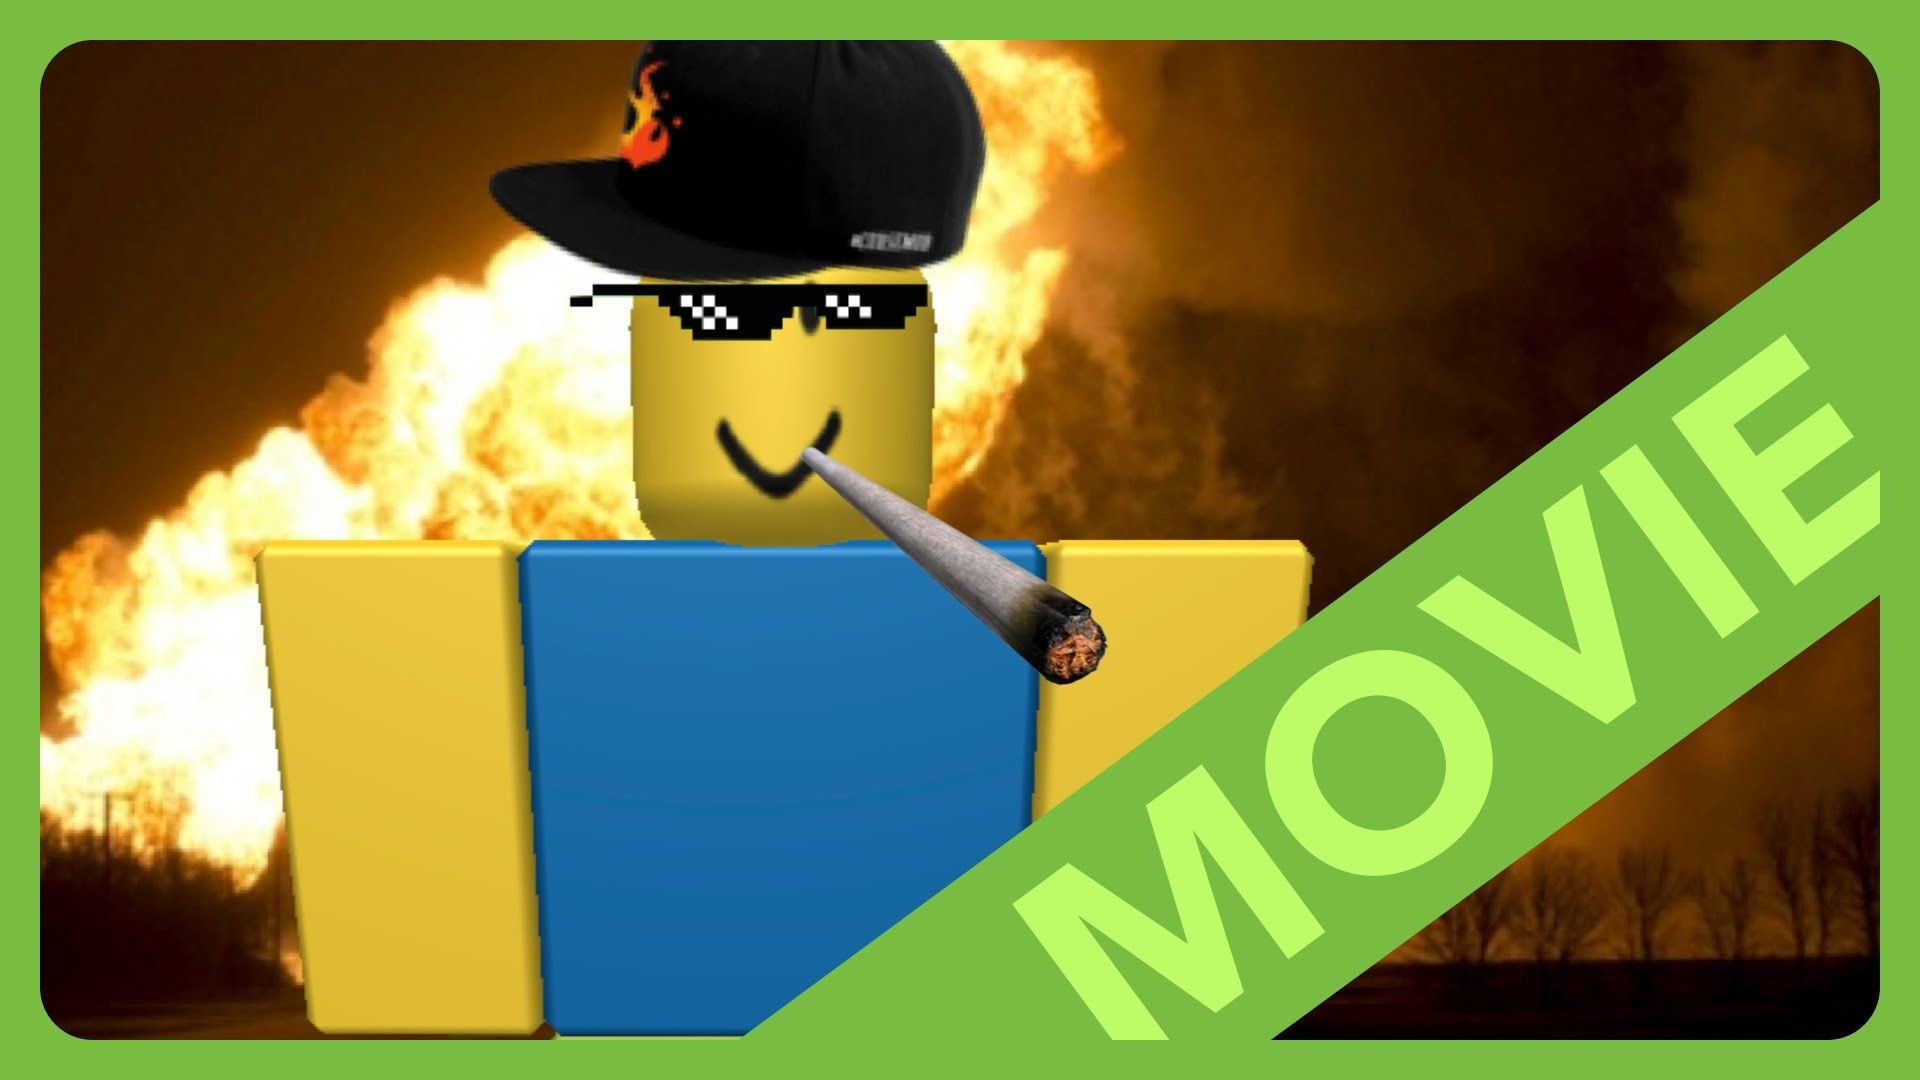 Cute Roblox Noobs Wallpapers